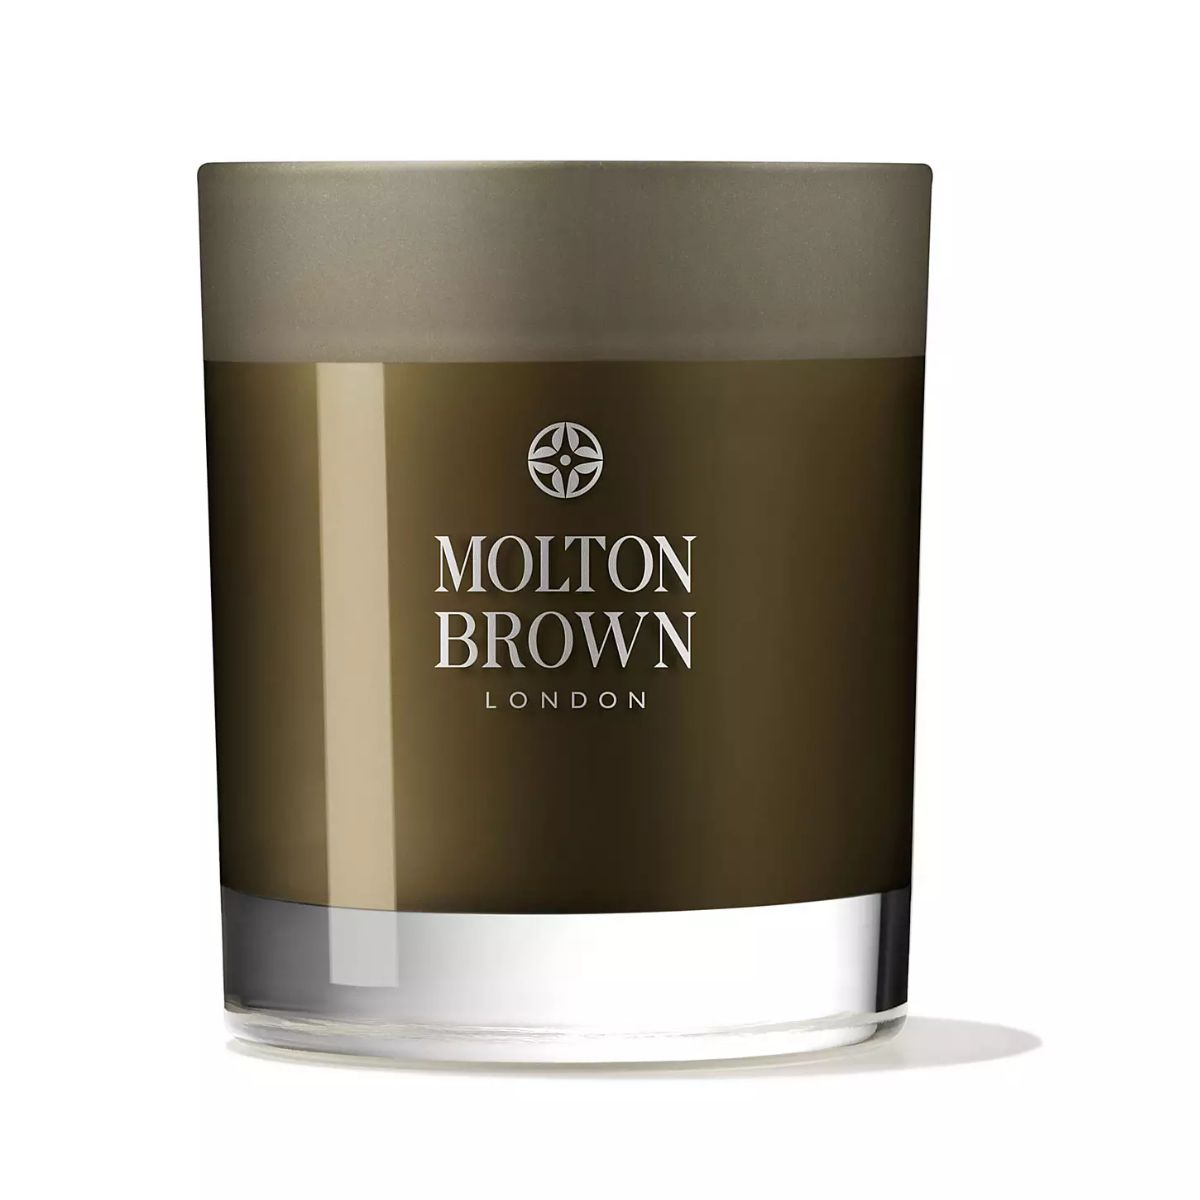 Molton Brown Tobacco Absolute Candle.